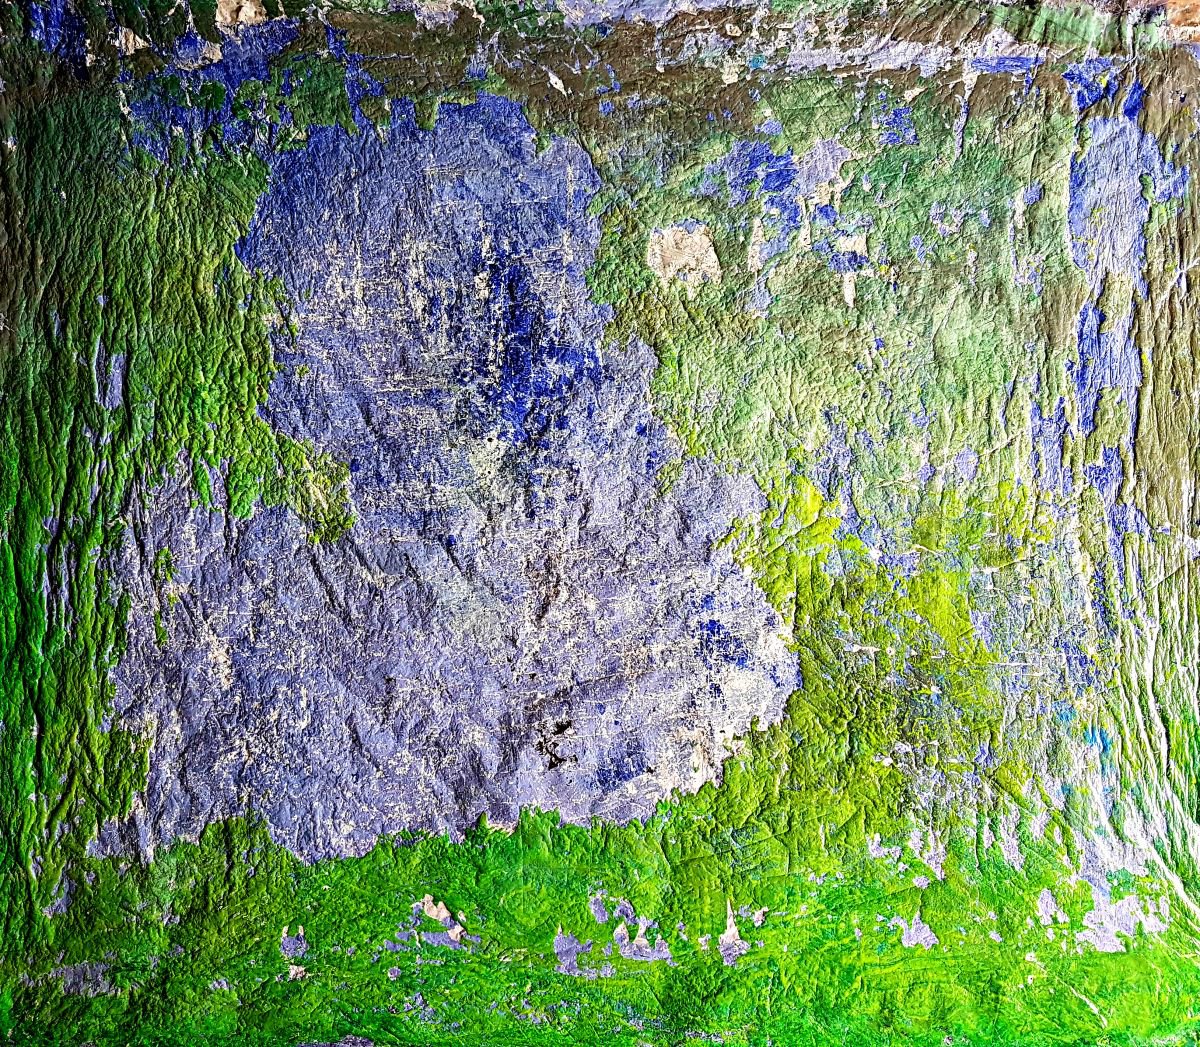 Hole jungle (n.214) - abstract landscape - 90 x 80 x 2,50 cm - ready to hang - acrylic pai... by Alessio Mazzarulli